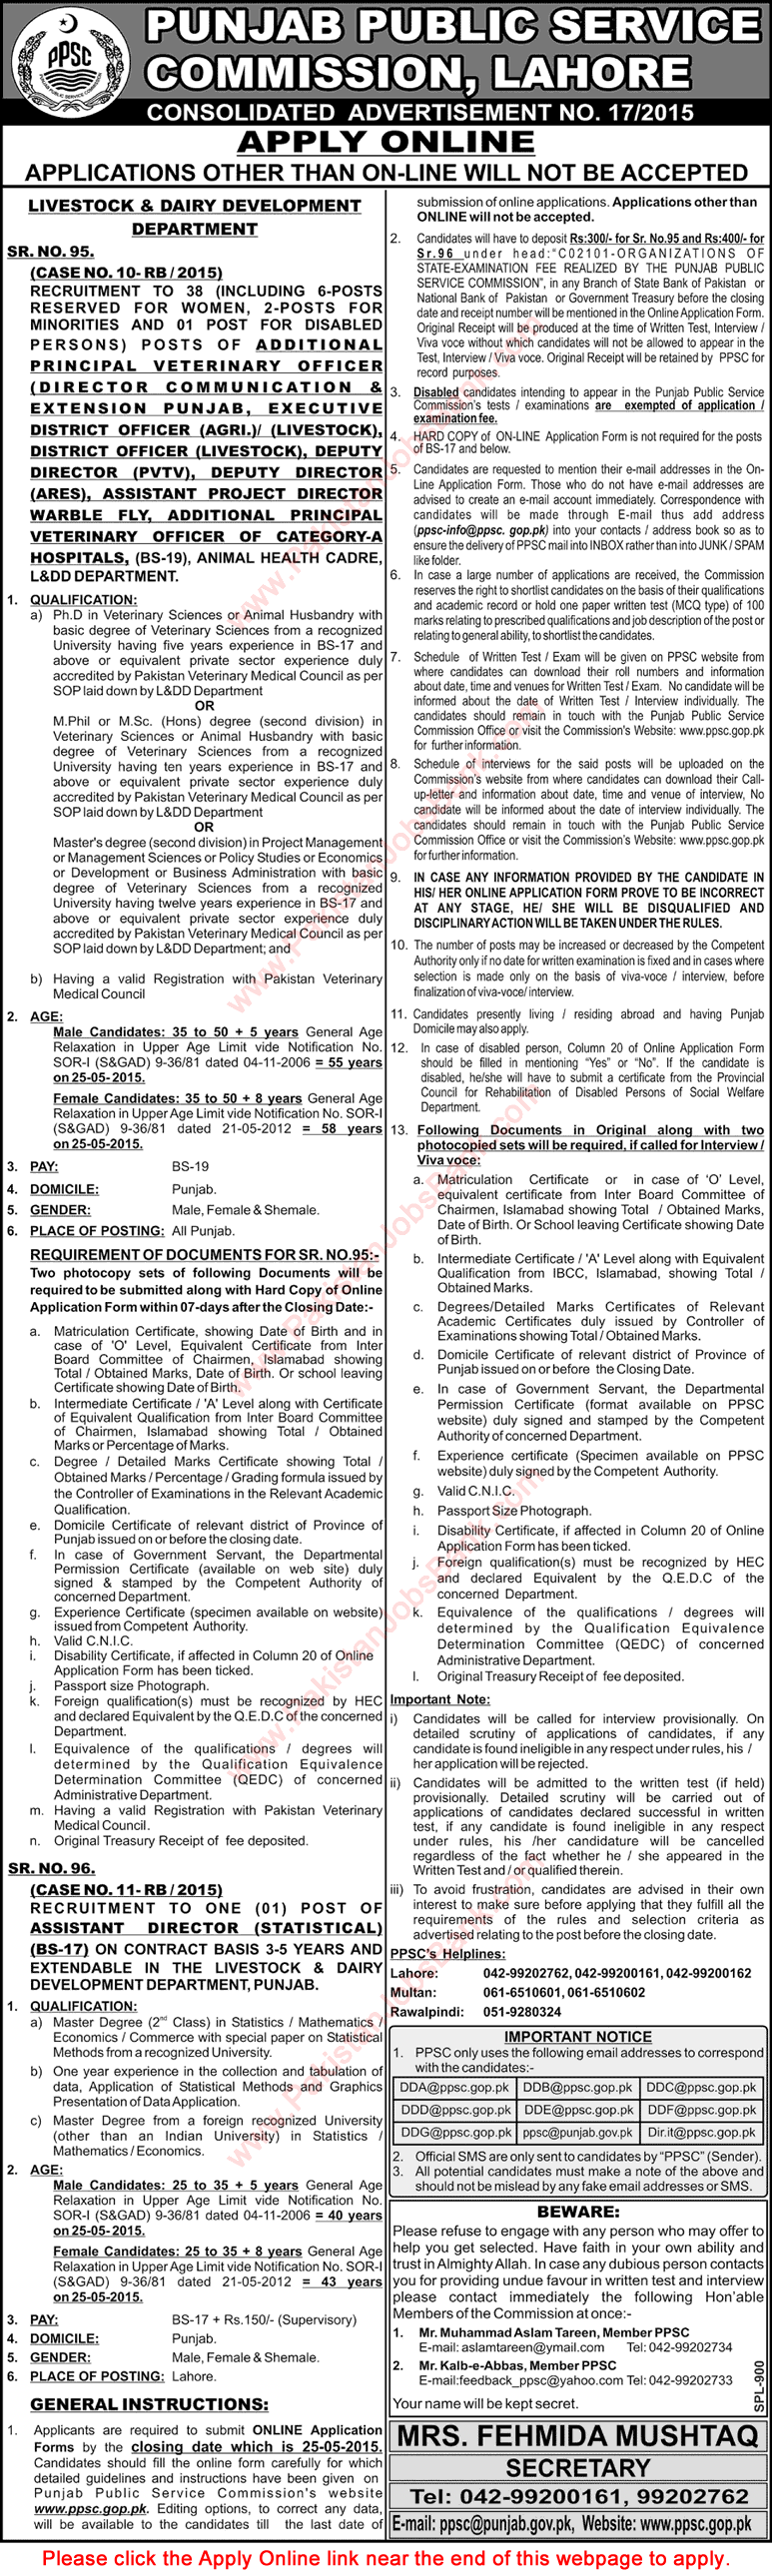 PPSC Jobs May 2015 Consolidated Advertisement No 17/2015 Apply Online Latest